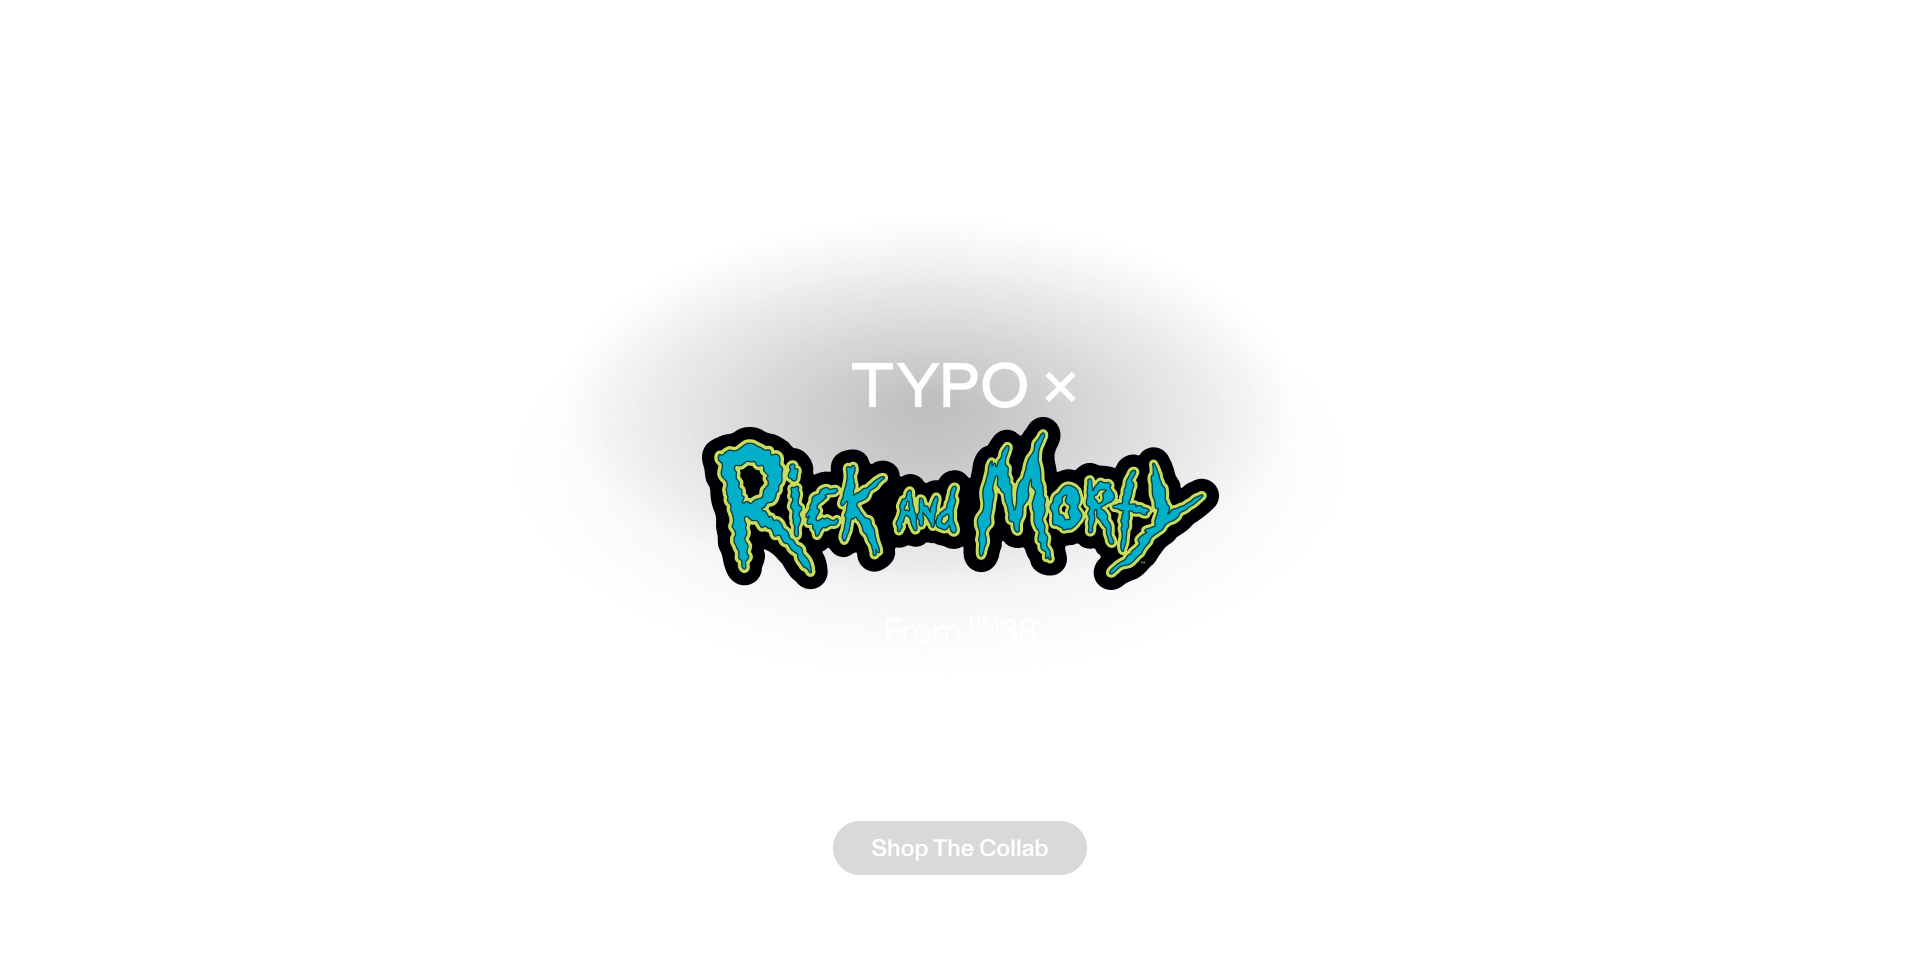 Typo x Rick And Morty. From RM38. Shop The Collab.